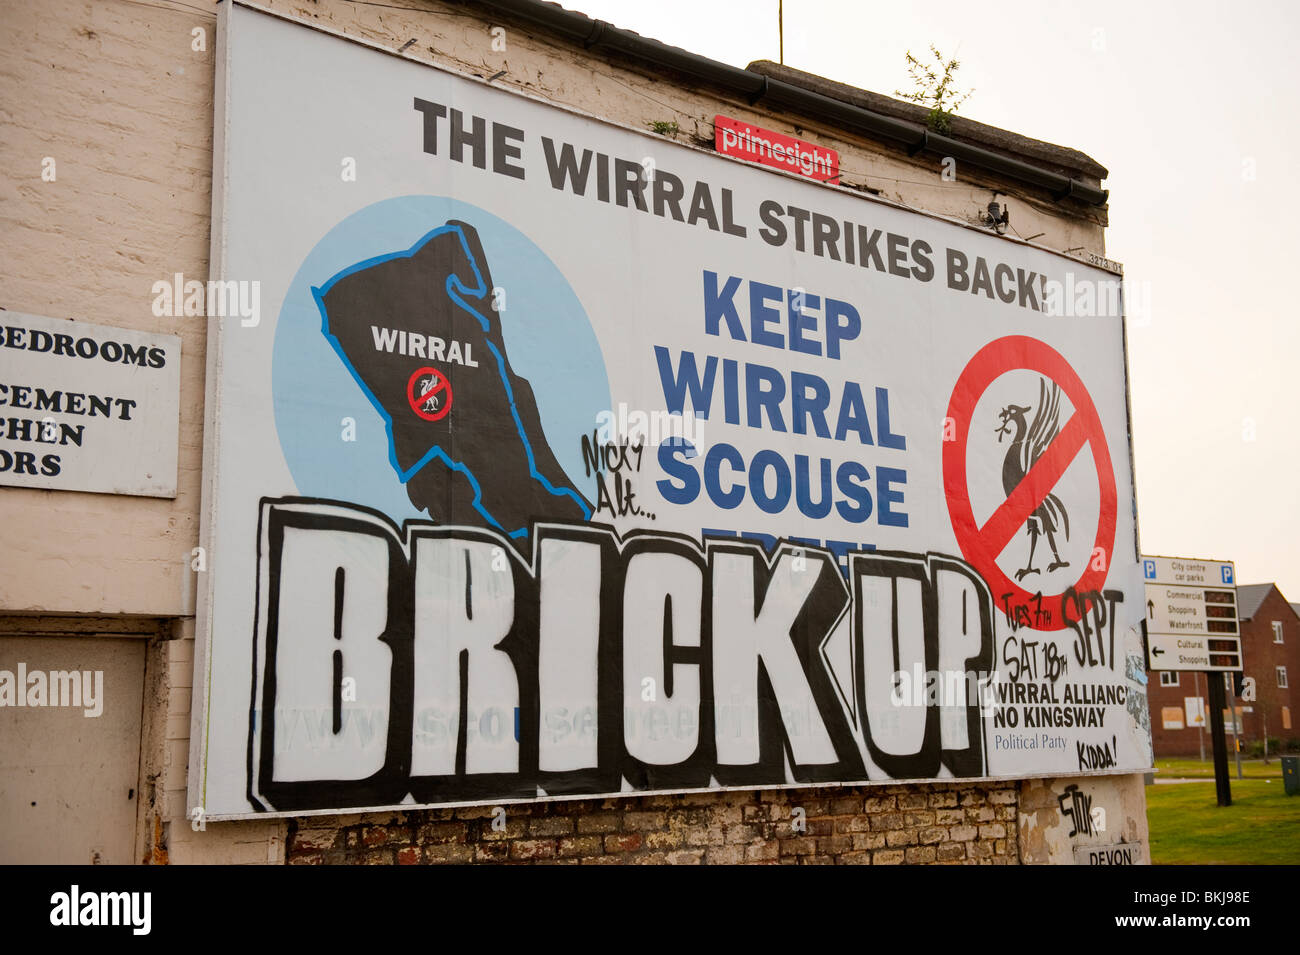 Keep Wirral Scouse Free poster Stock Photo